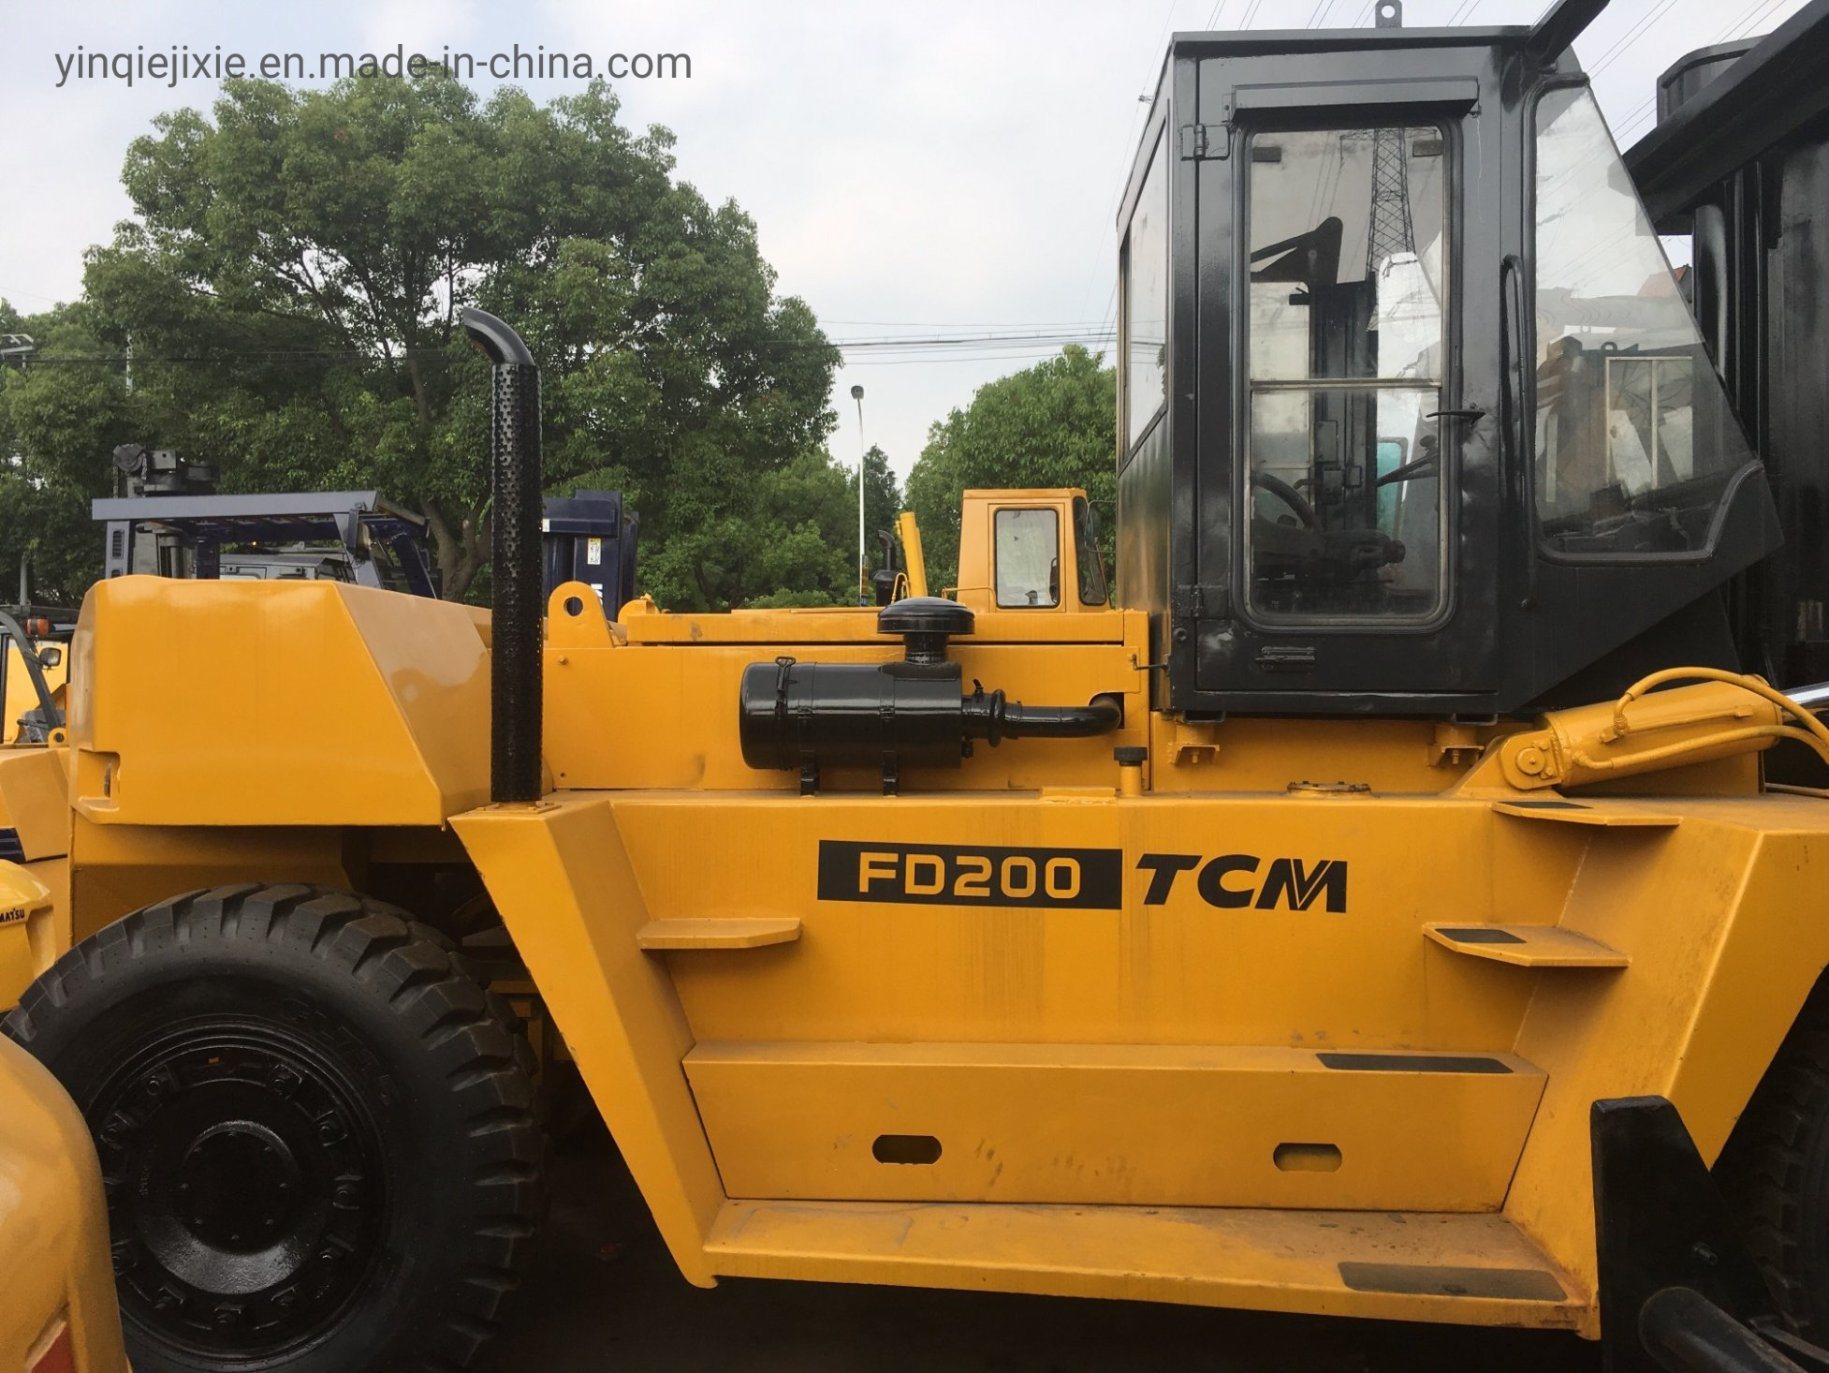 
                Used Tcm20t Forklift From Yinqie Machine Trade Co, Ltd
            